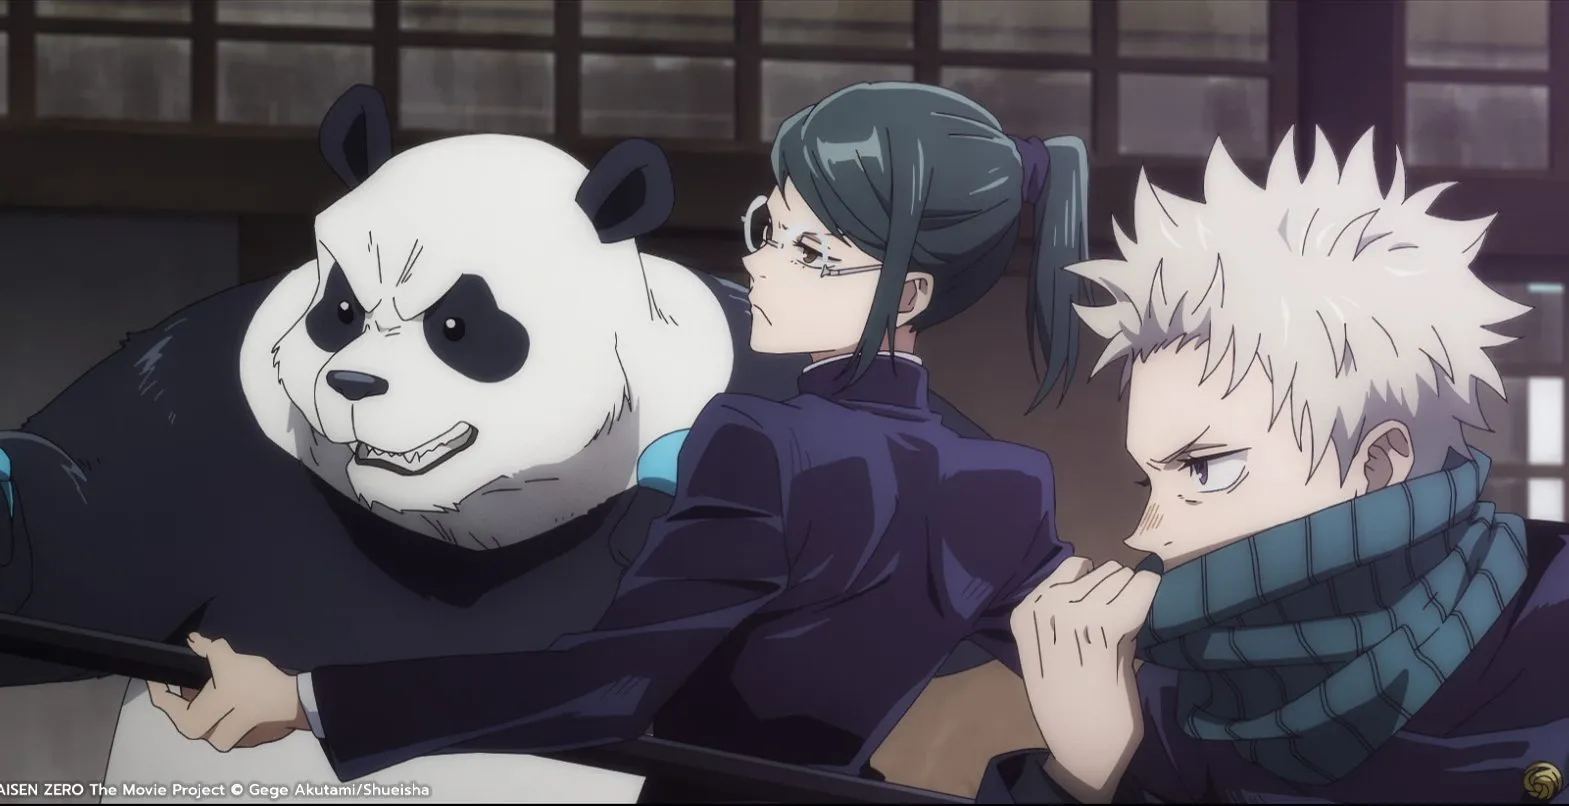 This is how Maki, inumaki and Panda fight in the video Jujutsu Kaisen: Cursed Clash